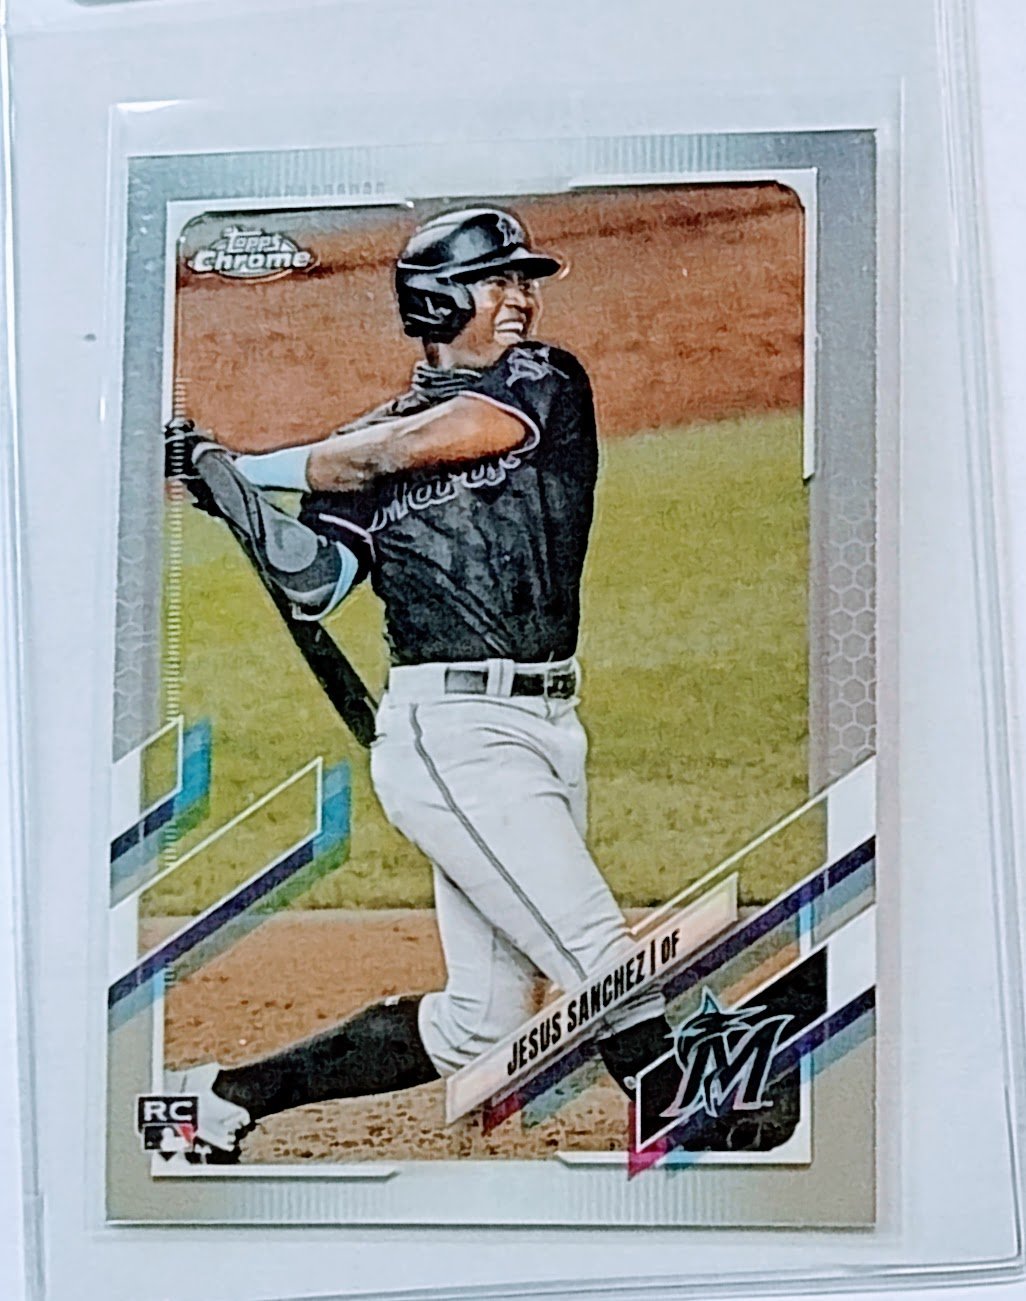 2021 Topps Chrome Jesus Sanchez Rookie Baseball Trading Card TPTV simple Xclusive Collectibles   